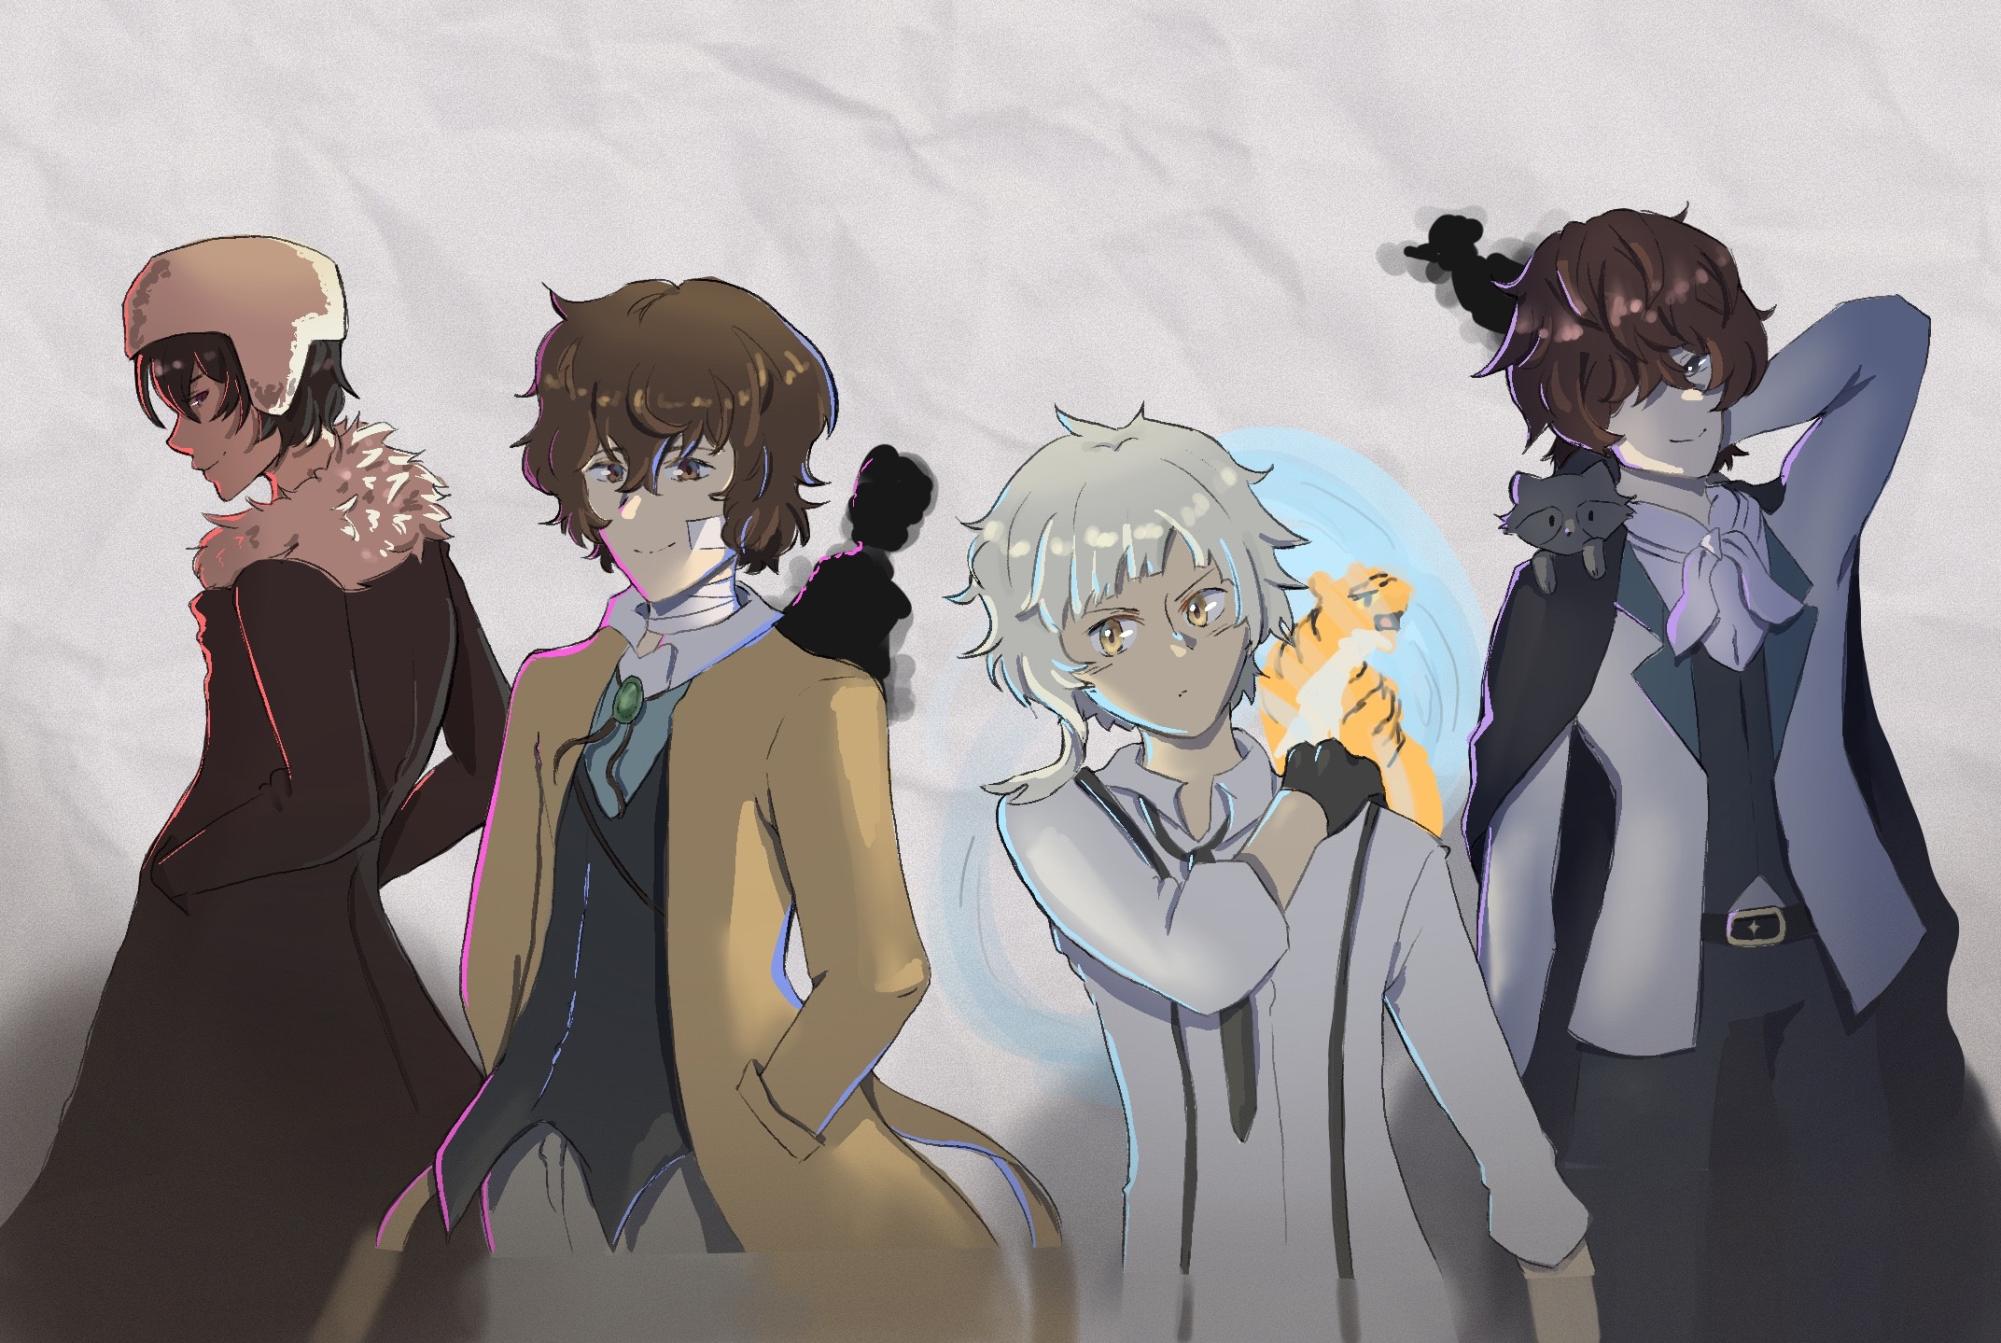 Bungo Stray Dogs Season 5 Episode 8 Review - But Why Tho?